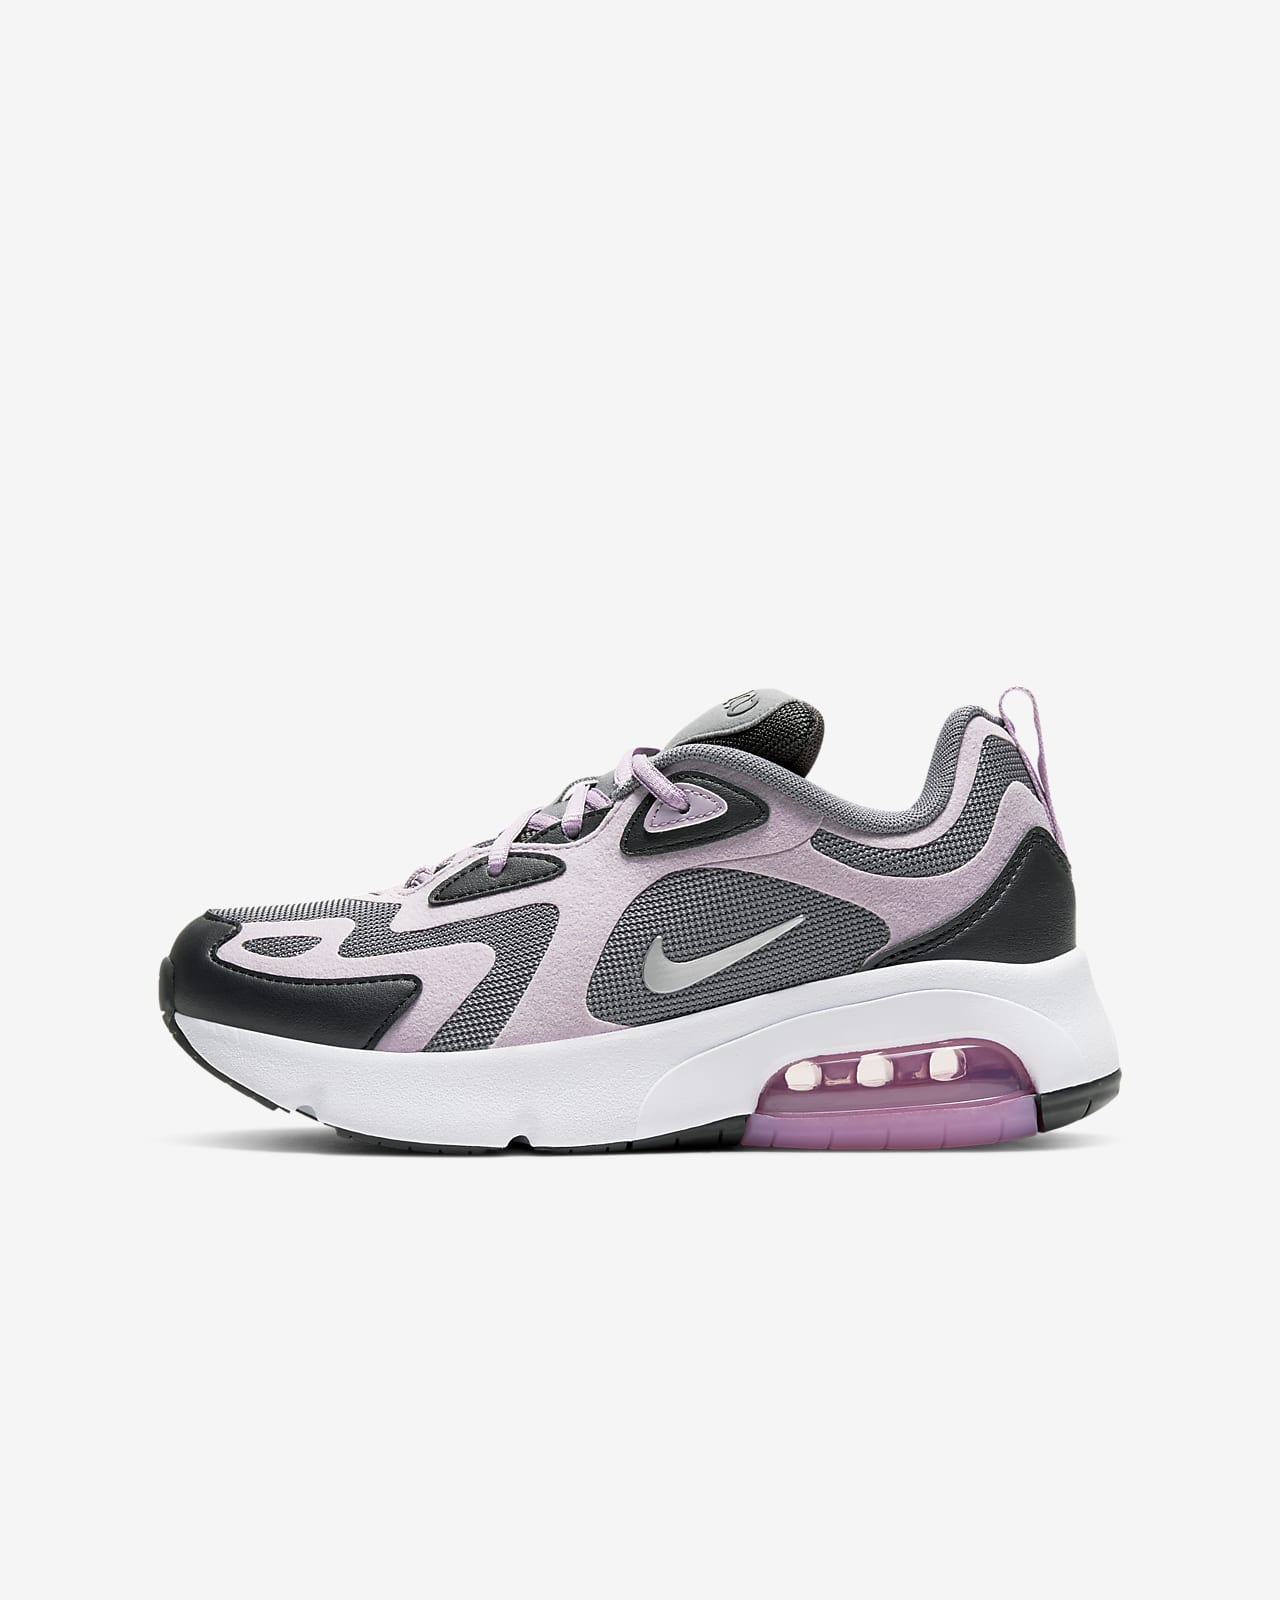 nike air max 200 pink and purple